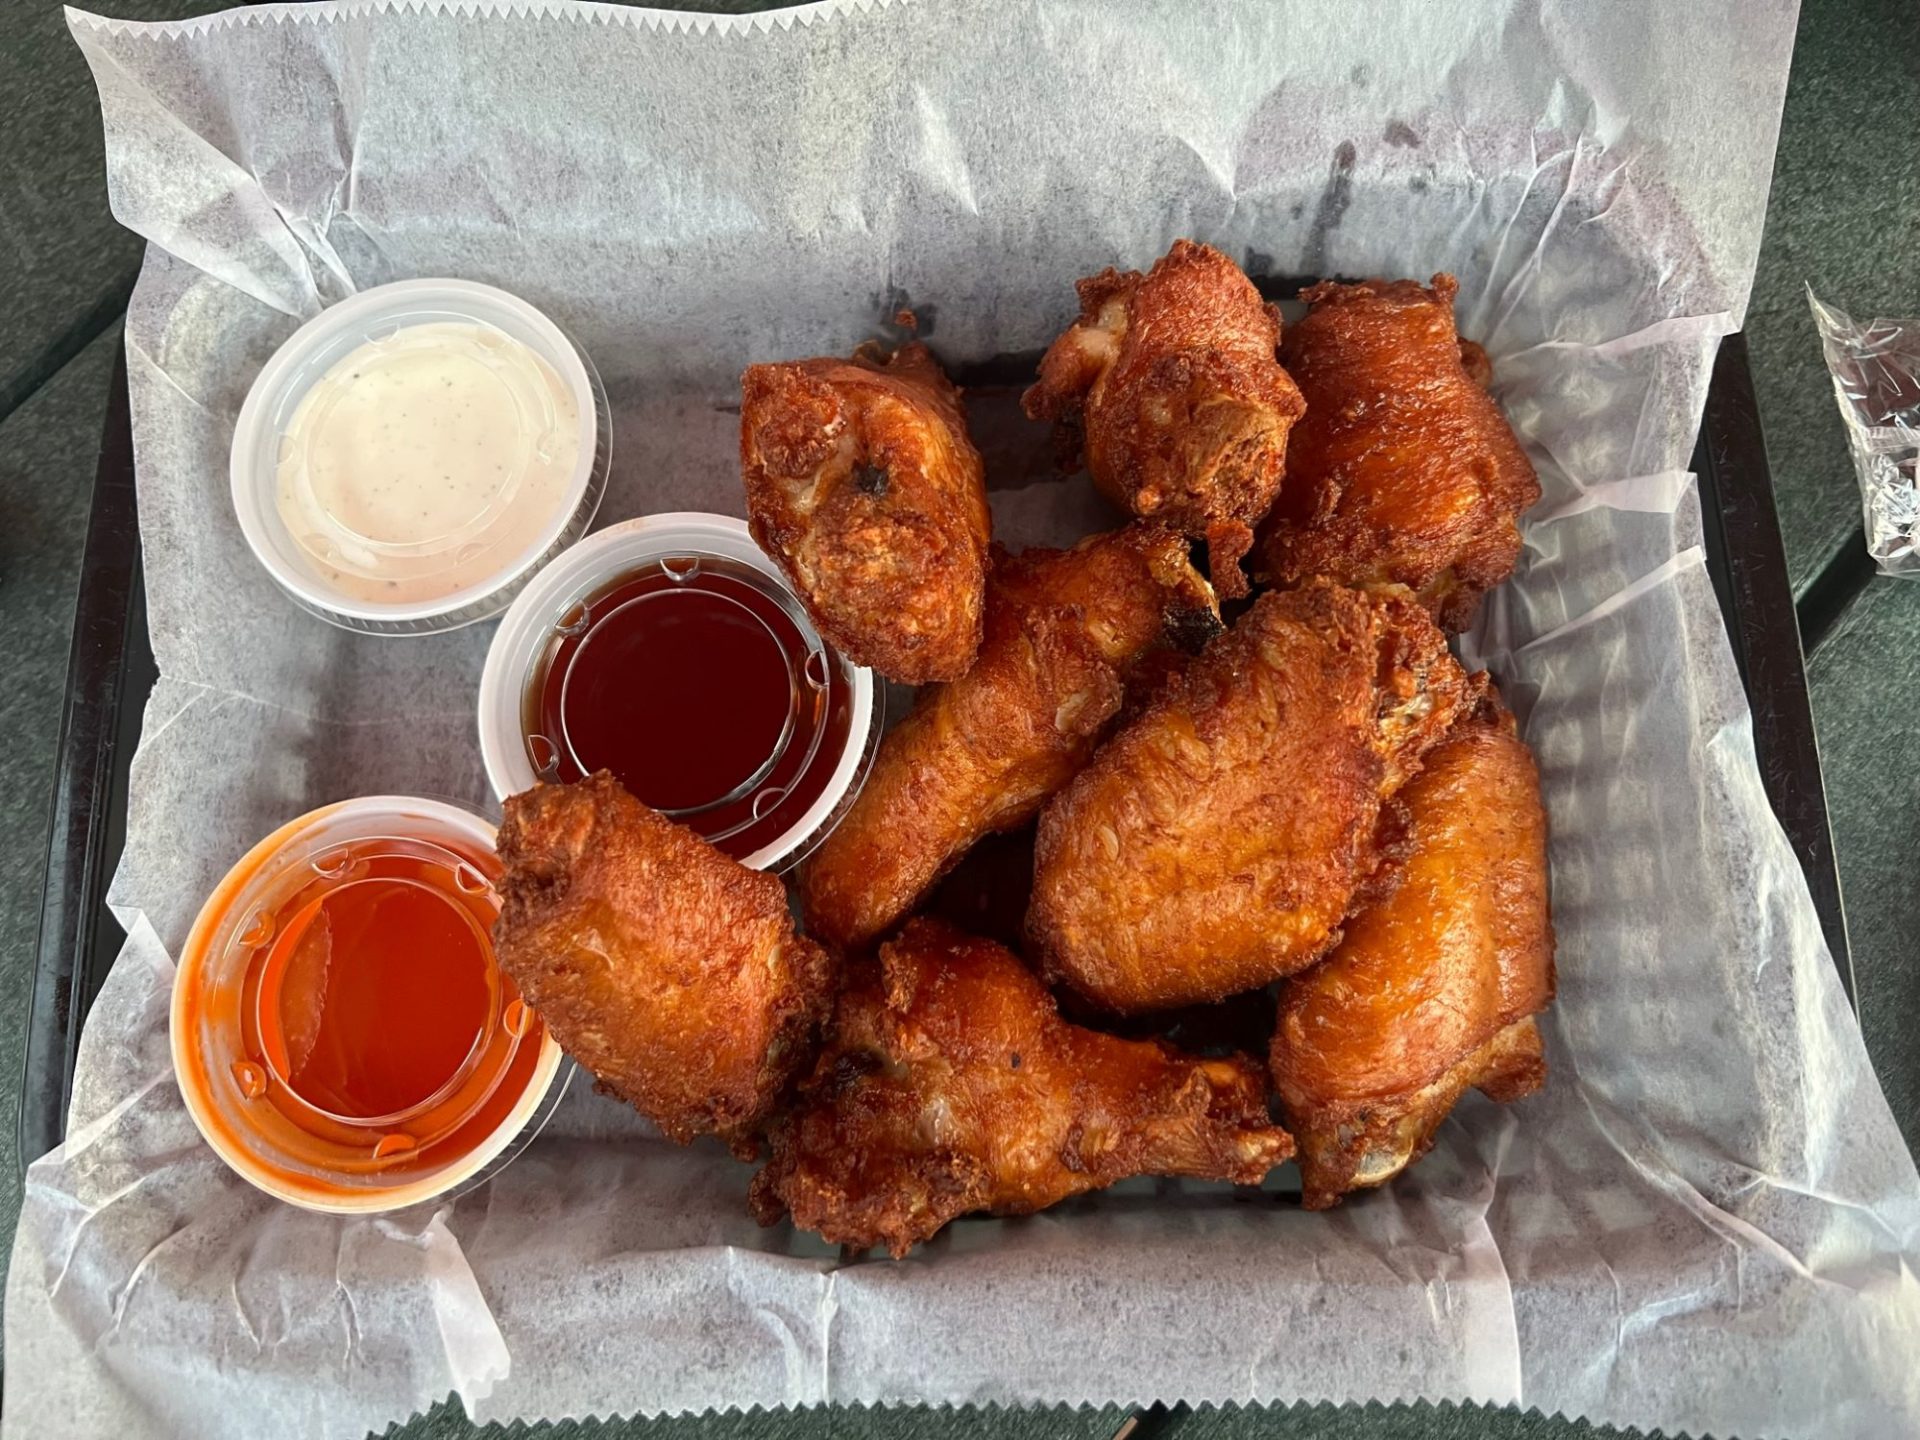 A basket lined with wax paper, with eight wings piled on one side, and three dipping sauces on the other.